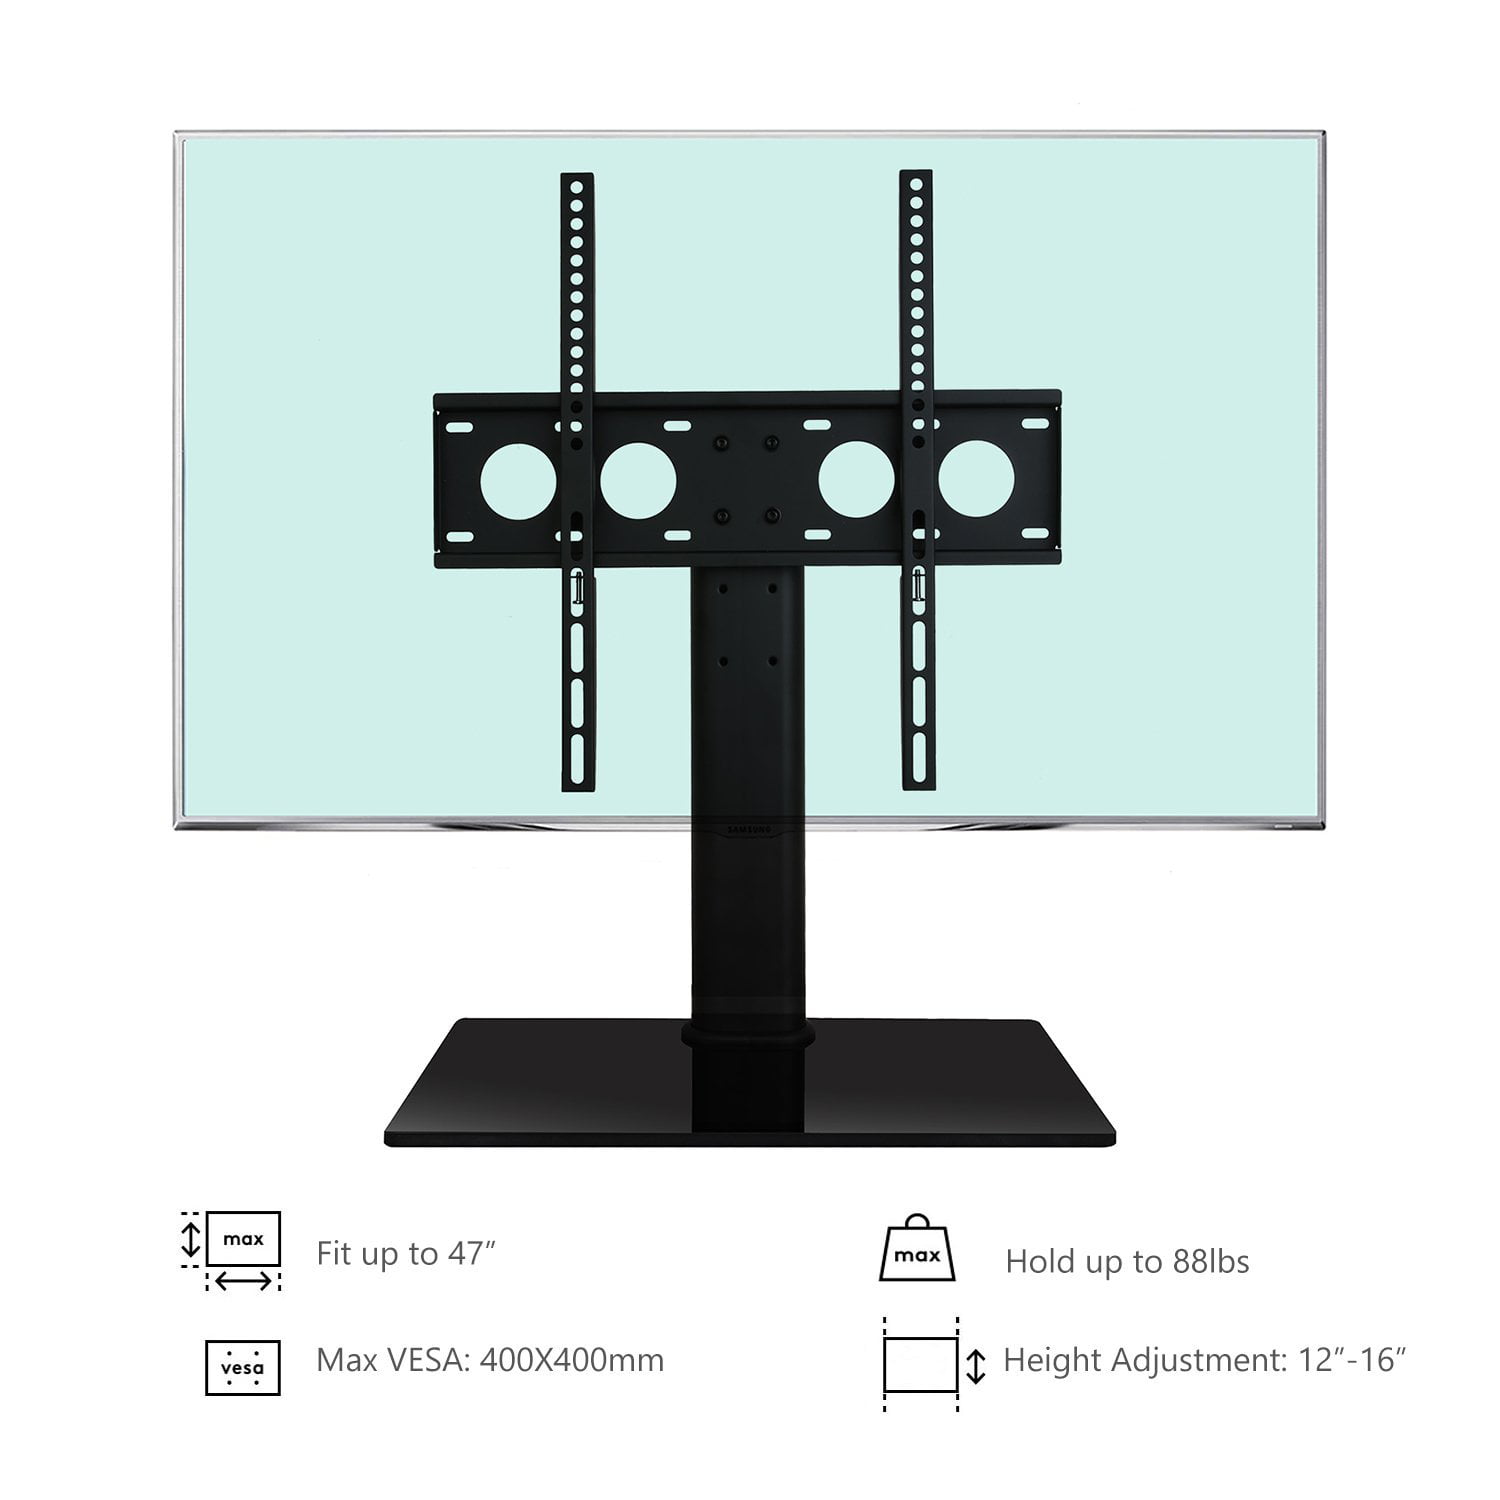 wali table top tv stand with glass base and security wire fits most 32-47  inch led, lcd, oled and plasma flat screen tv with vesa pattern up to 